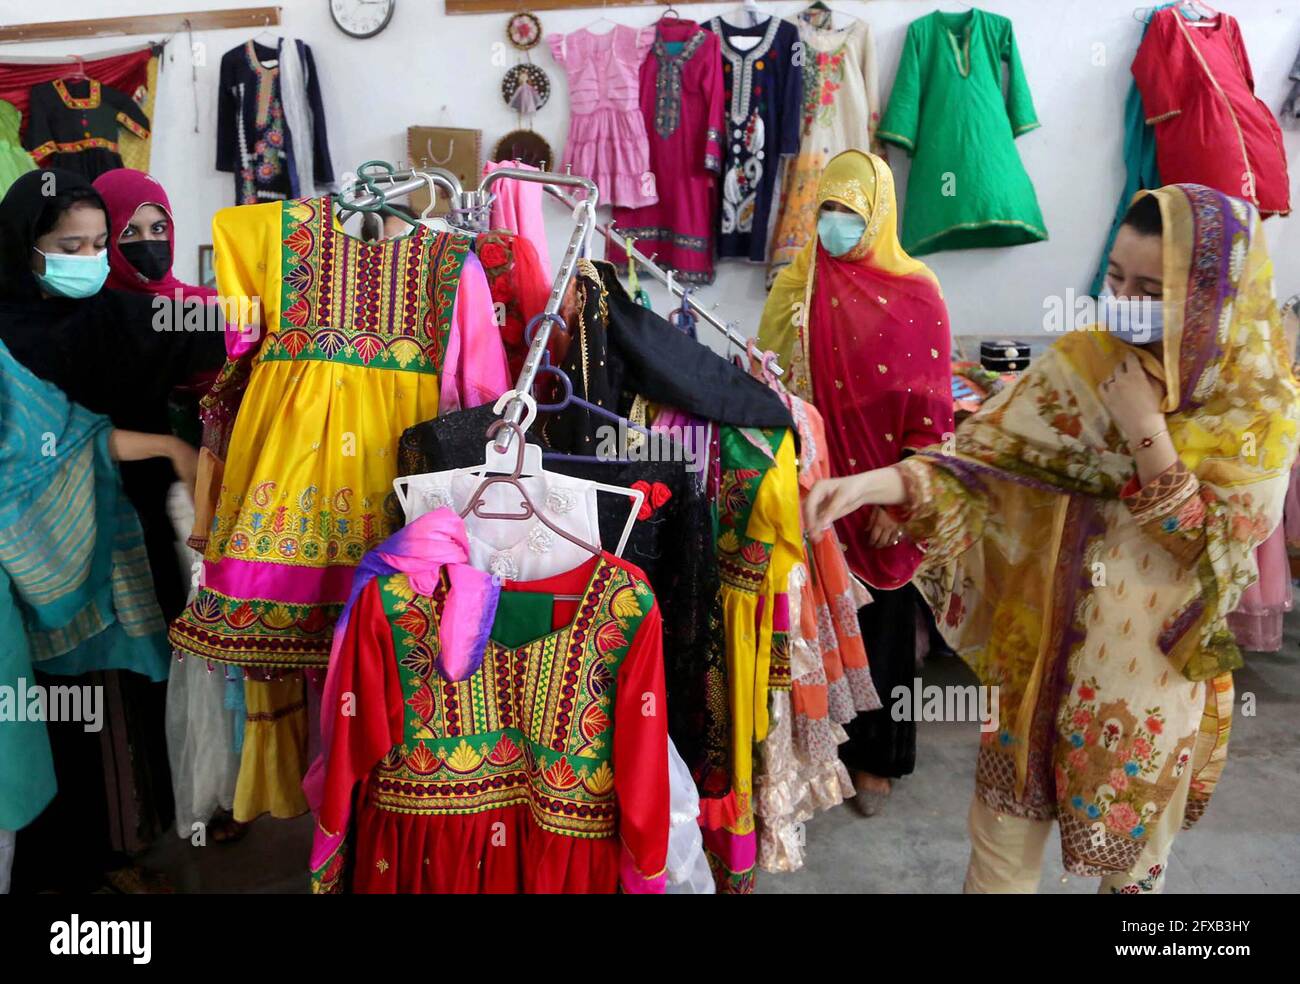 Readymade garments for sale at Numaish-2015 Stock Photo - Alamy